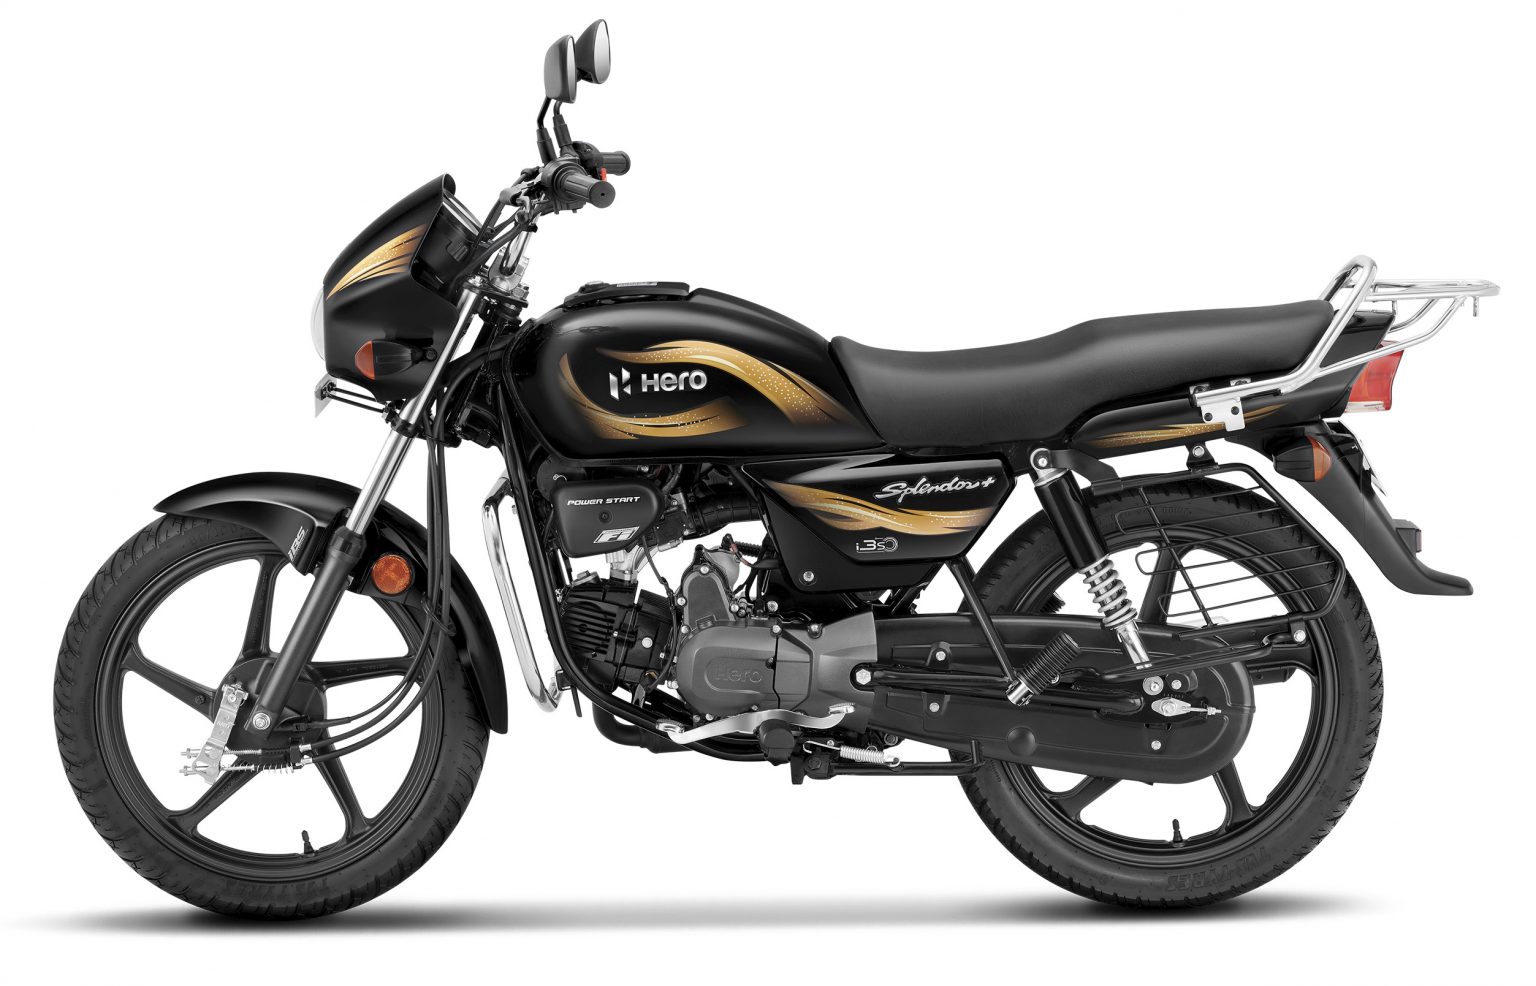 Hero MotoCorp extends free service, AMC & warranty period in India